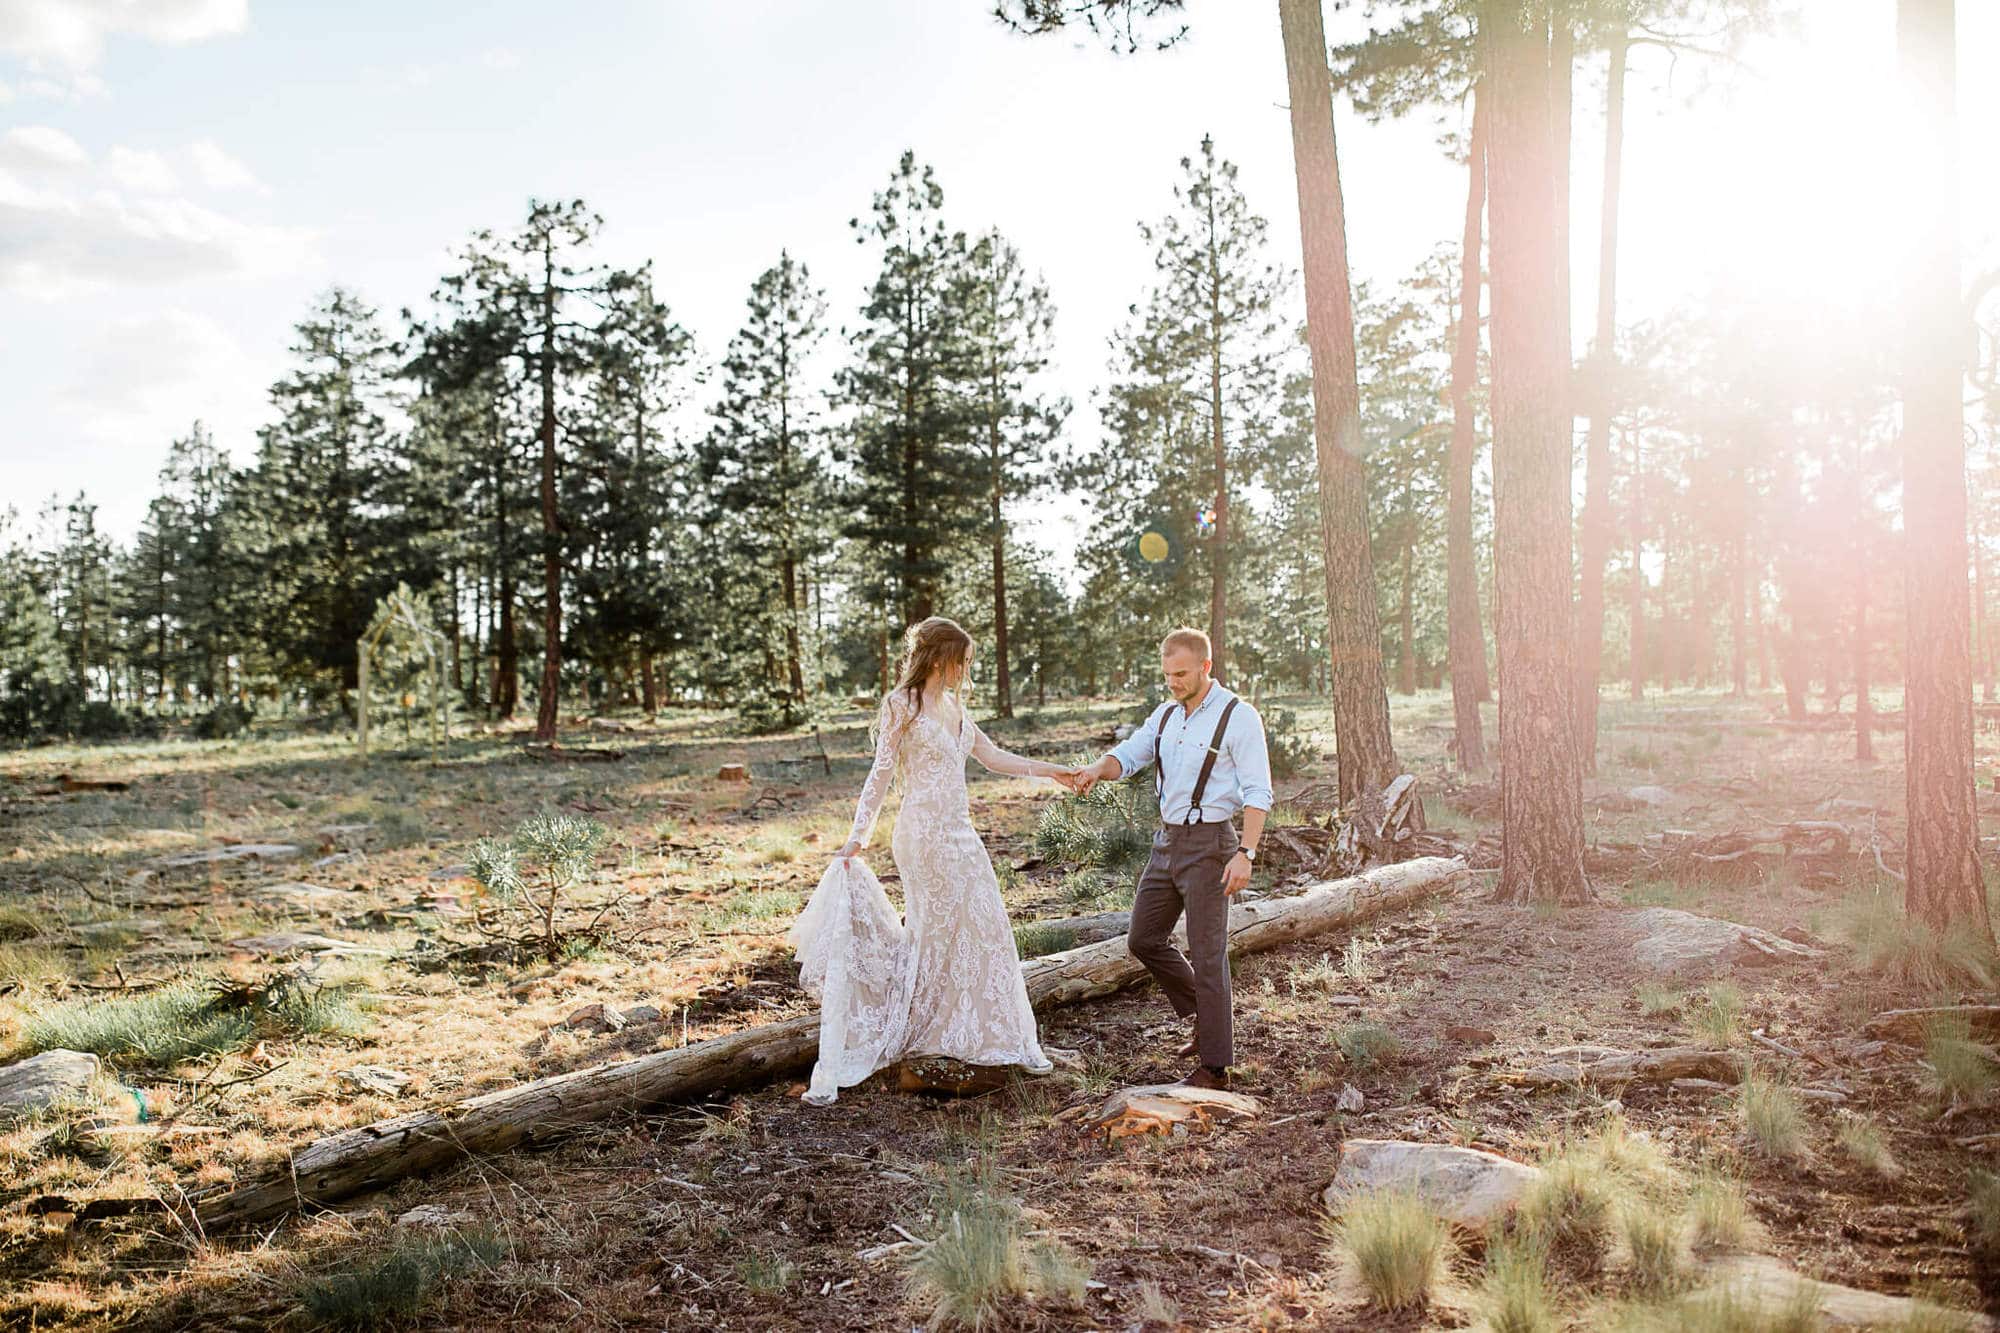 It's my Best of 2019 post! So excited to share this with you; 2019 is the year I rebranded as an Adventure Wedding and Elopement Photographer!